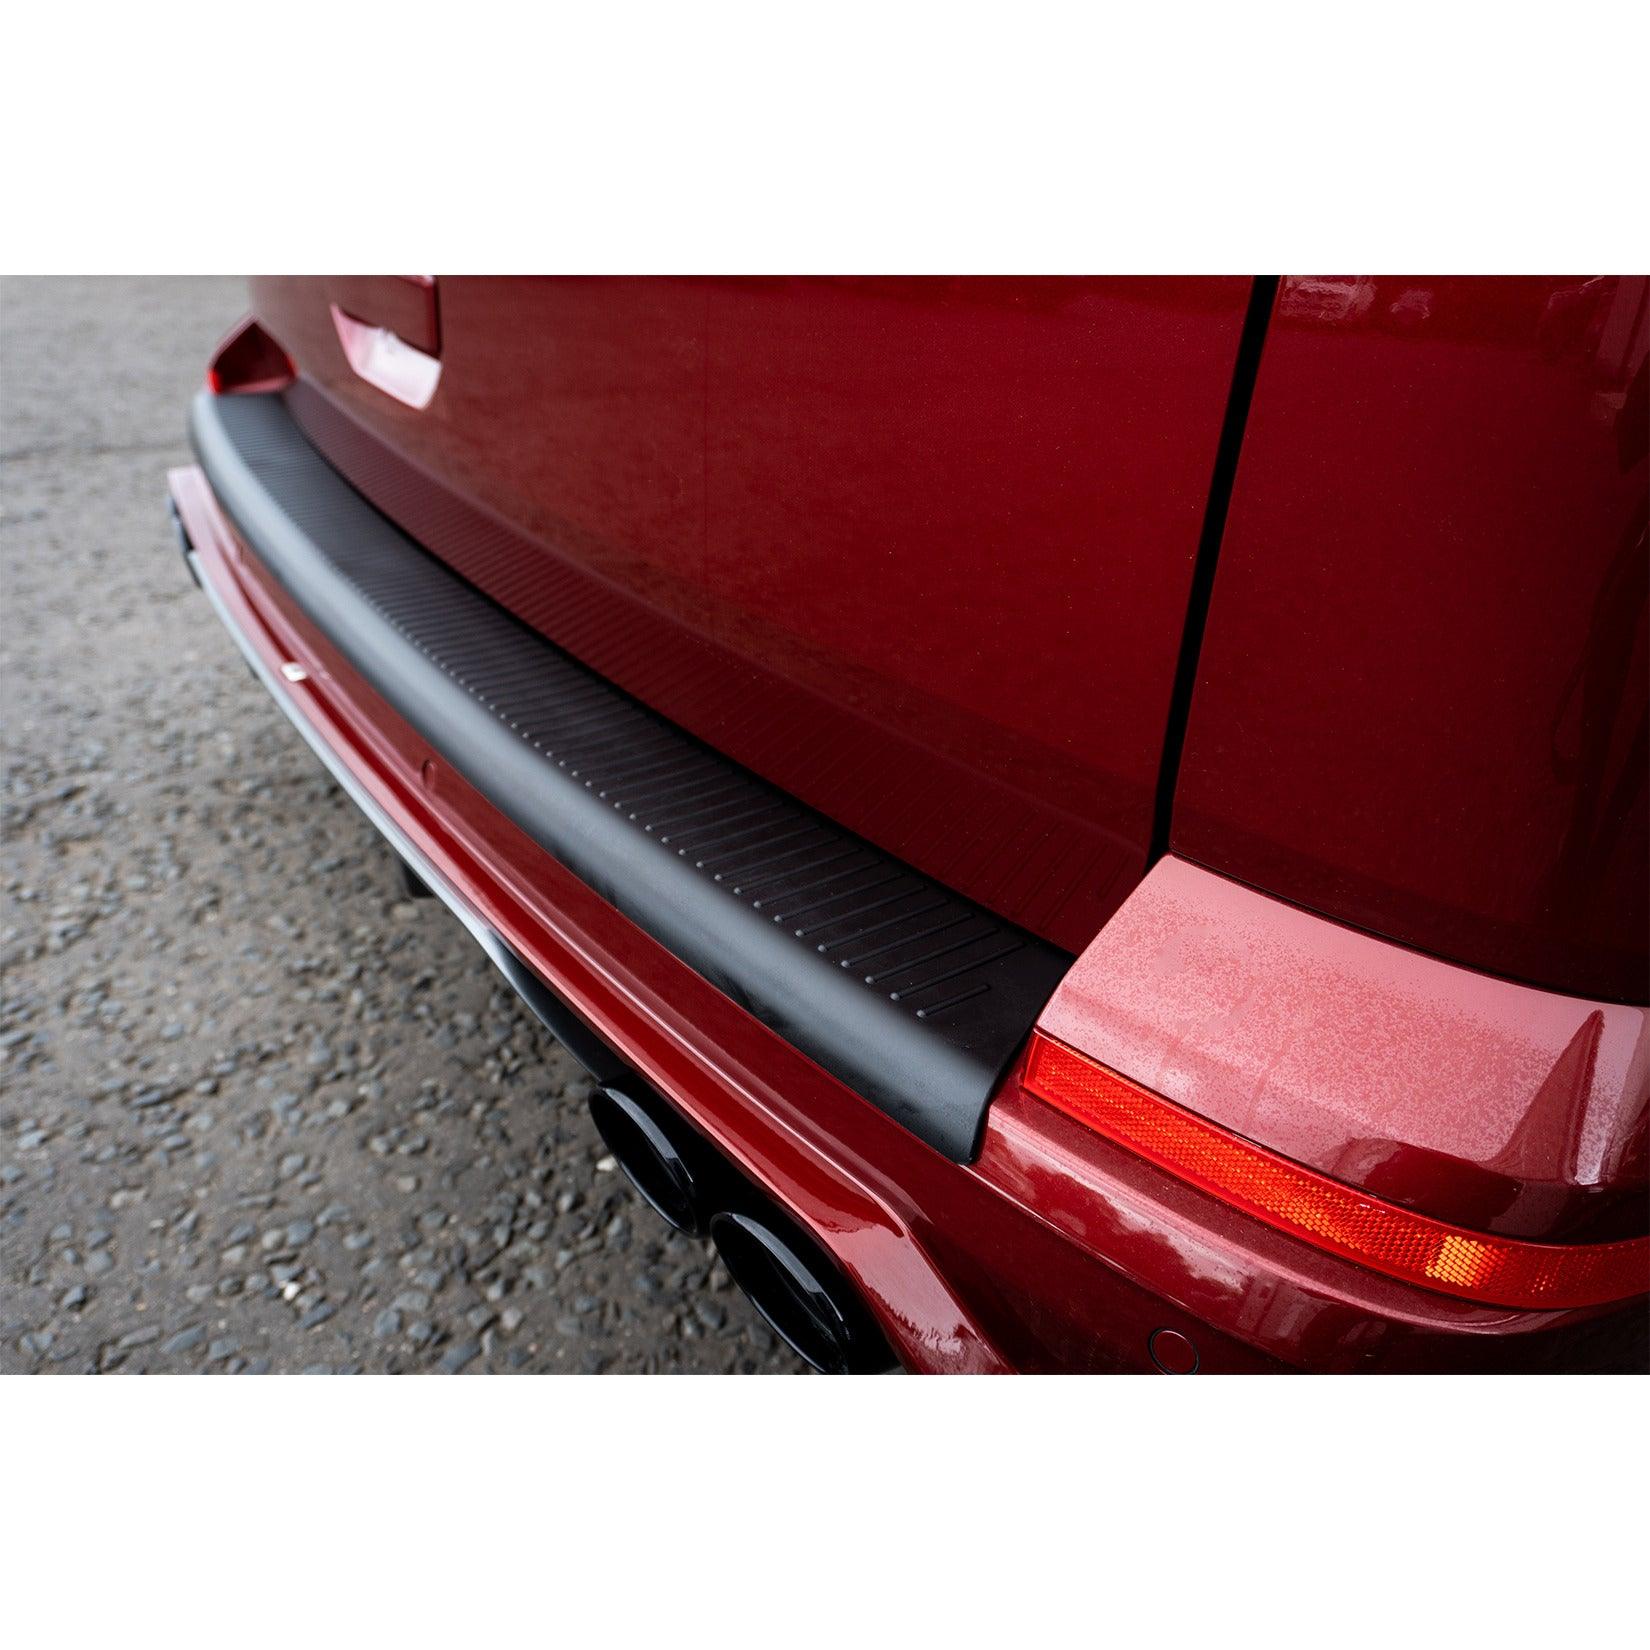 VW TRANSPORTER T6 2015 ON - REAR BUMPER COVER PROTECTOR - TAILGATE VERSION - Storm Xccessories2